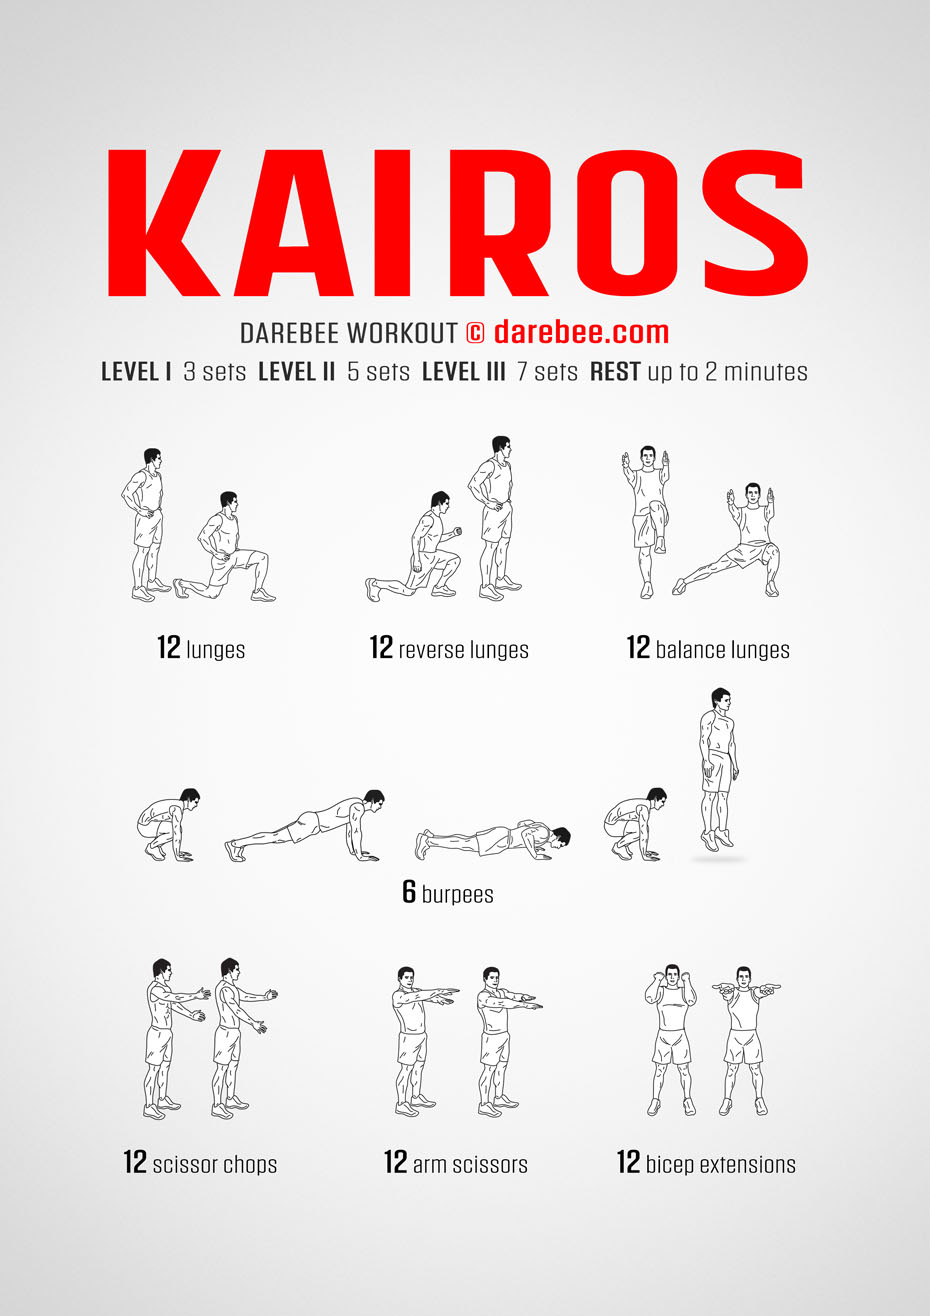 Kairos is a Darebee no-equipment full-body strength home workout. 